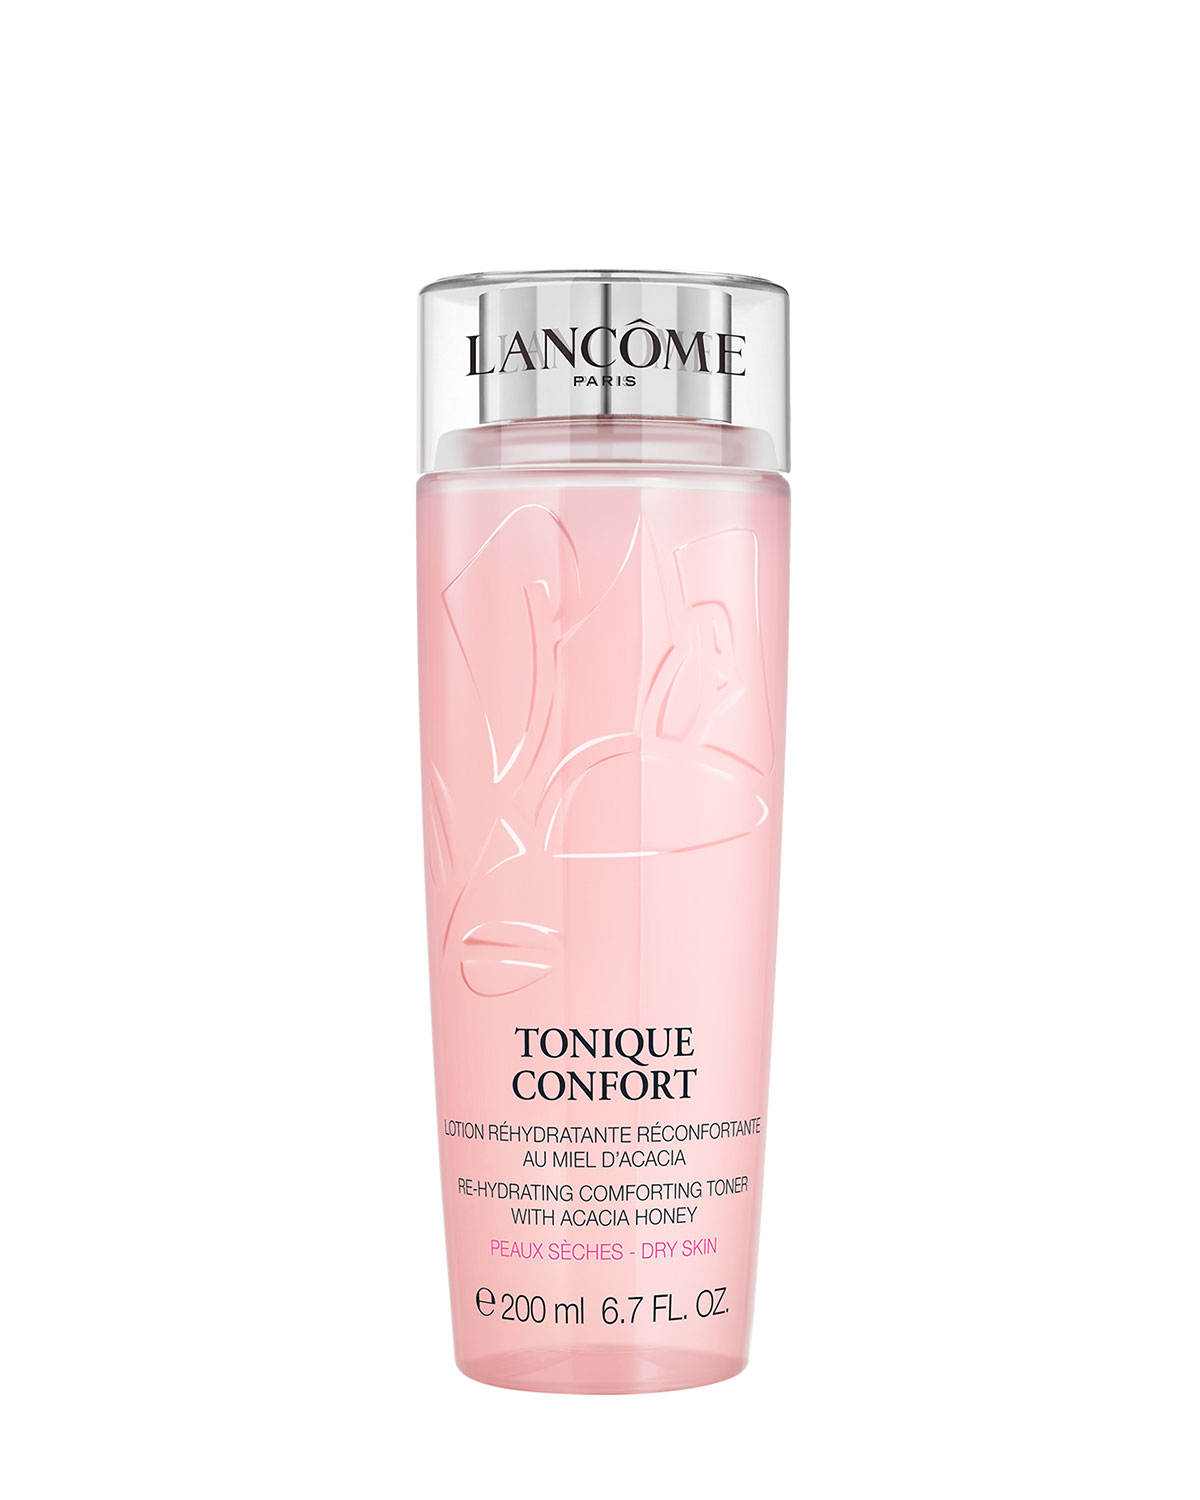 Tonique Confort Re-Hydrating Comforting Toner with Acacia Honey, 6.7 oz.